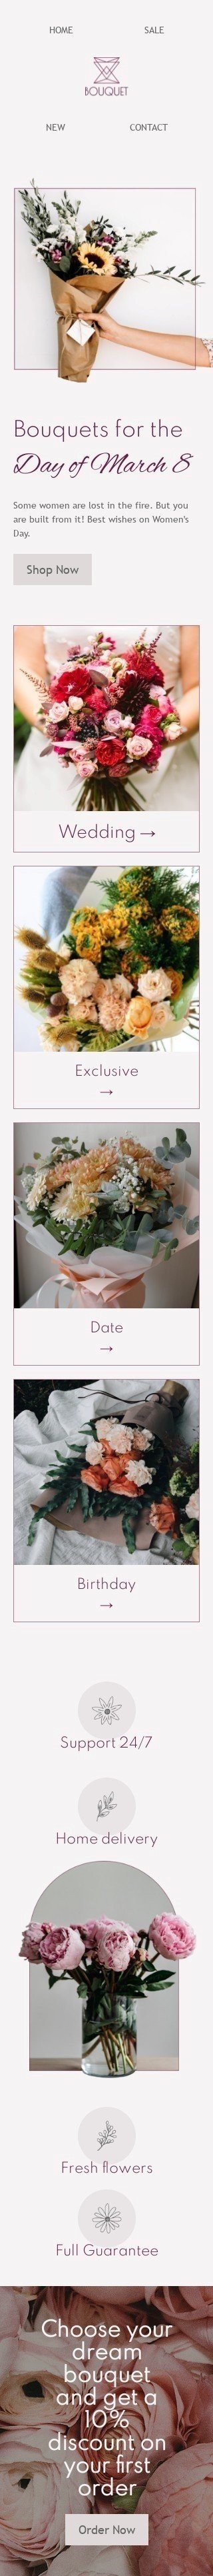 Women's Day Email Template "Best wishes on Women's Day" for Gifts & Flowers industry mobile view